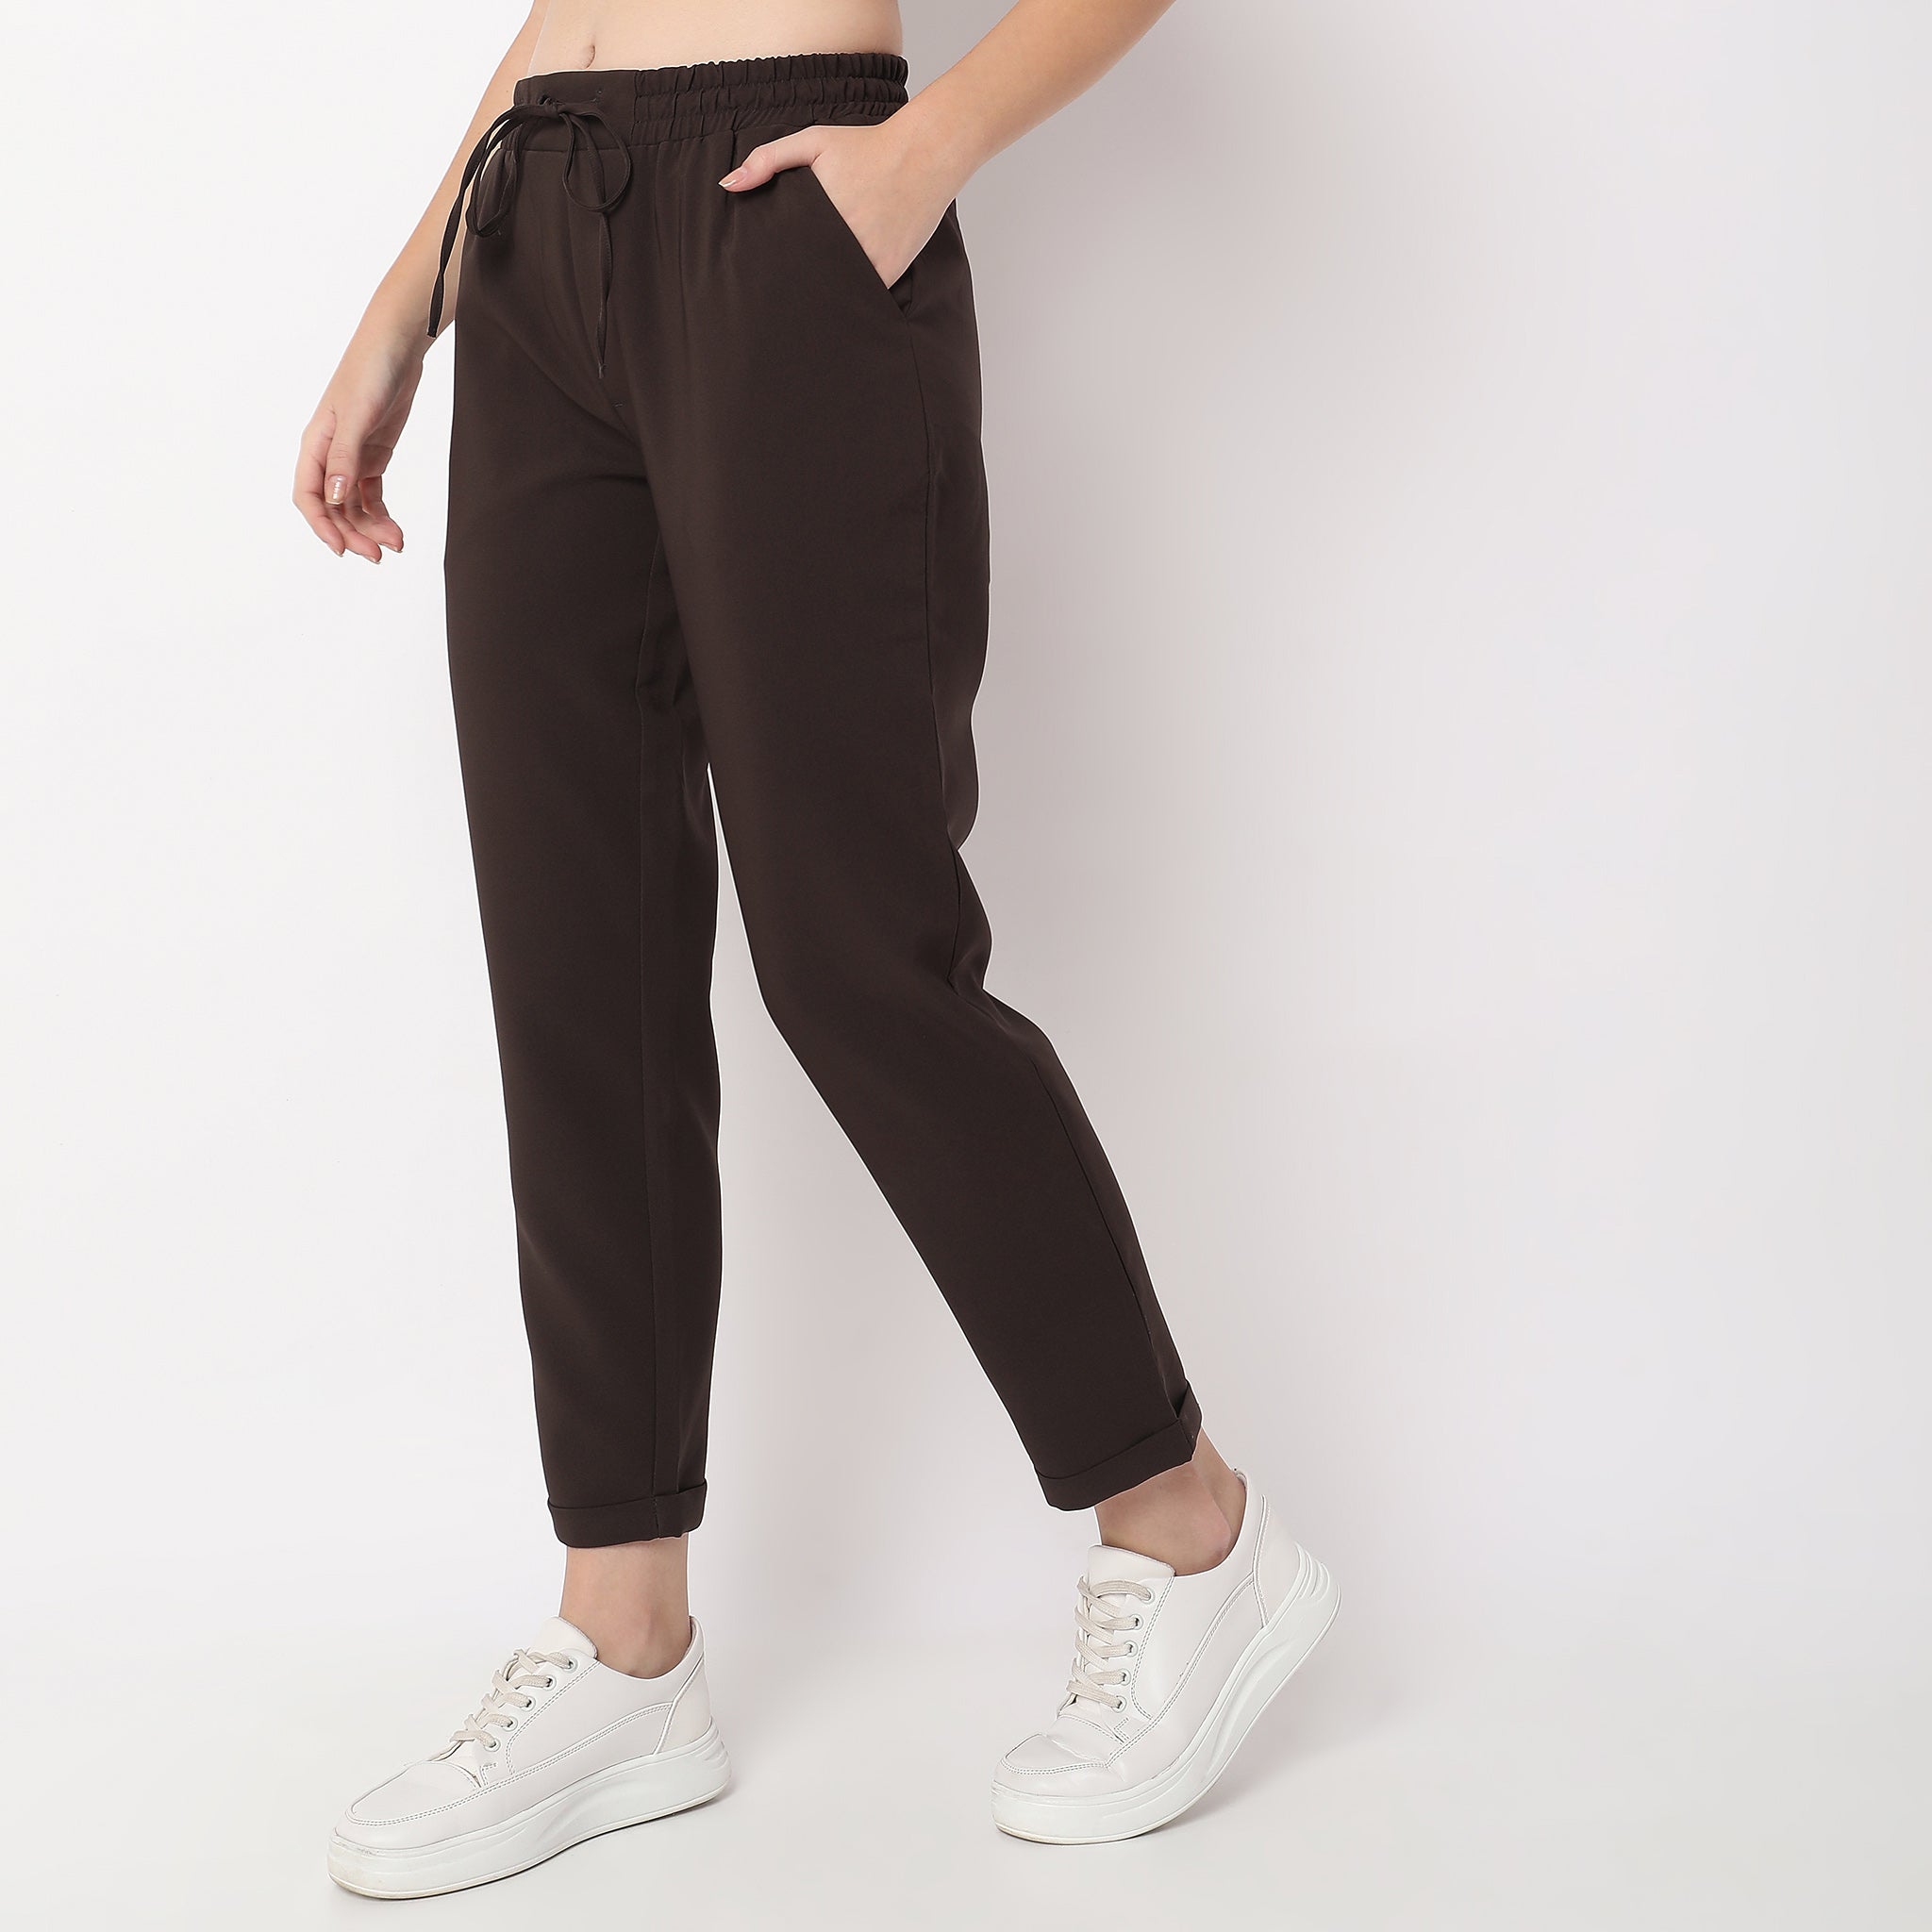 & OTHER STORIES Slim Flared High Waist Trousers in Black | Endource